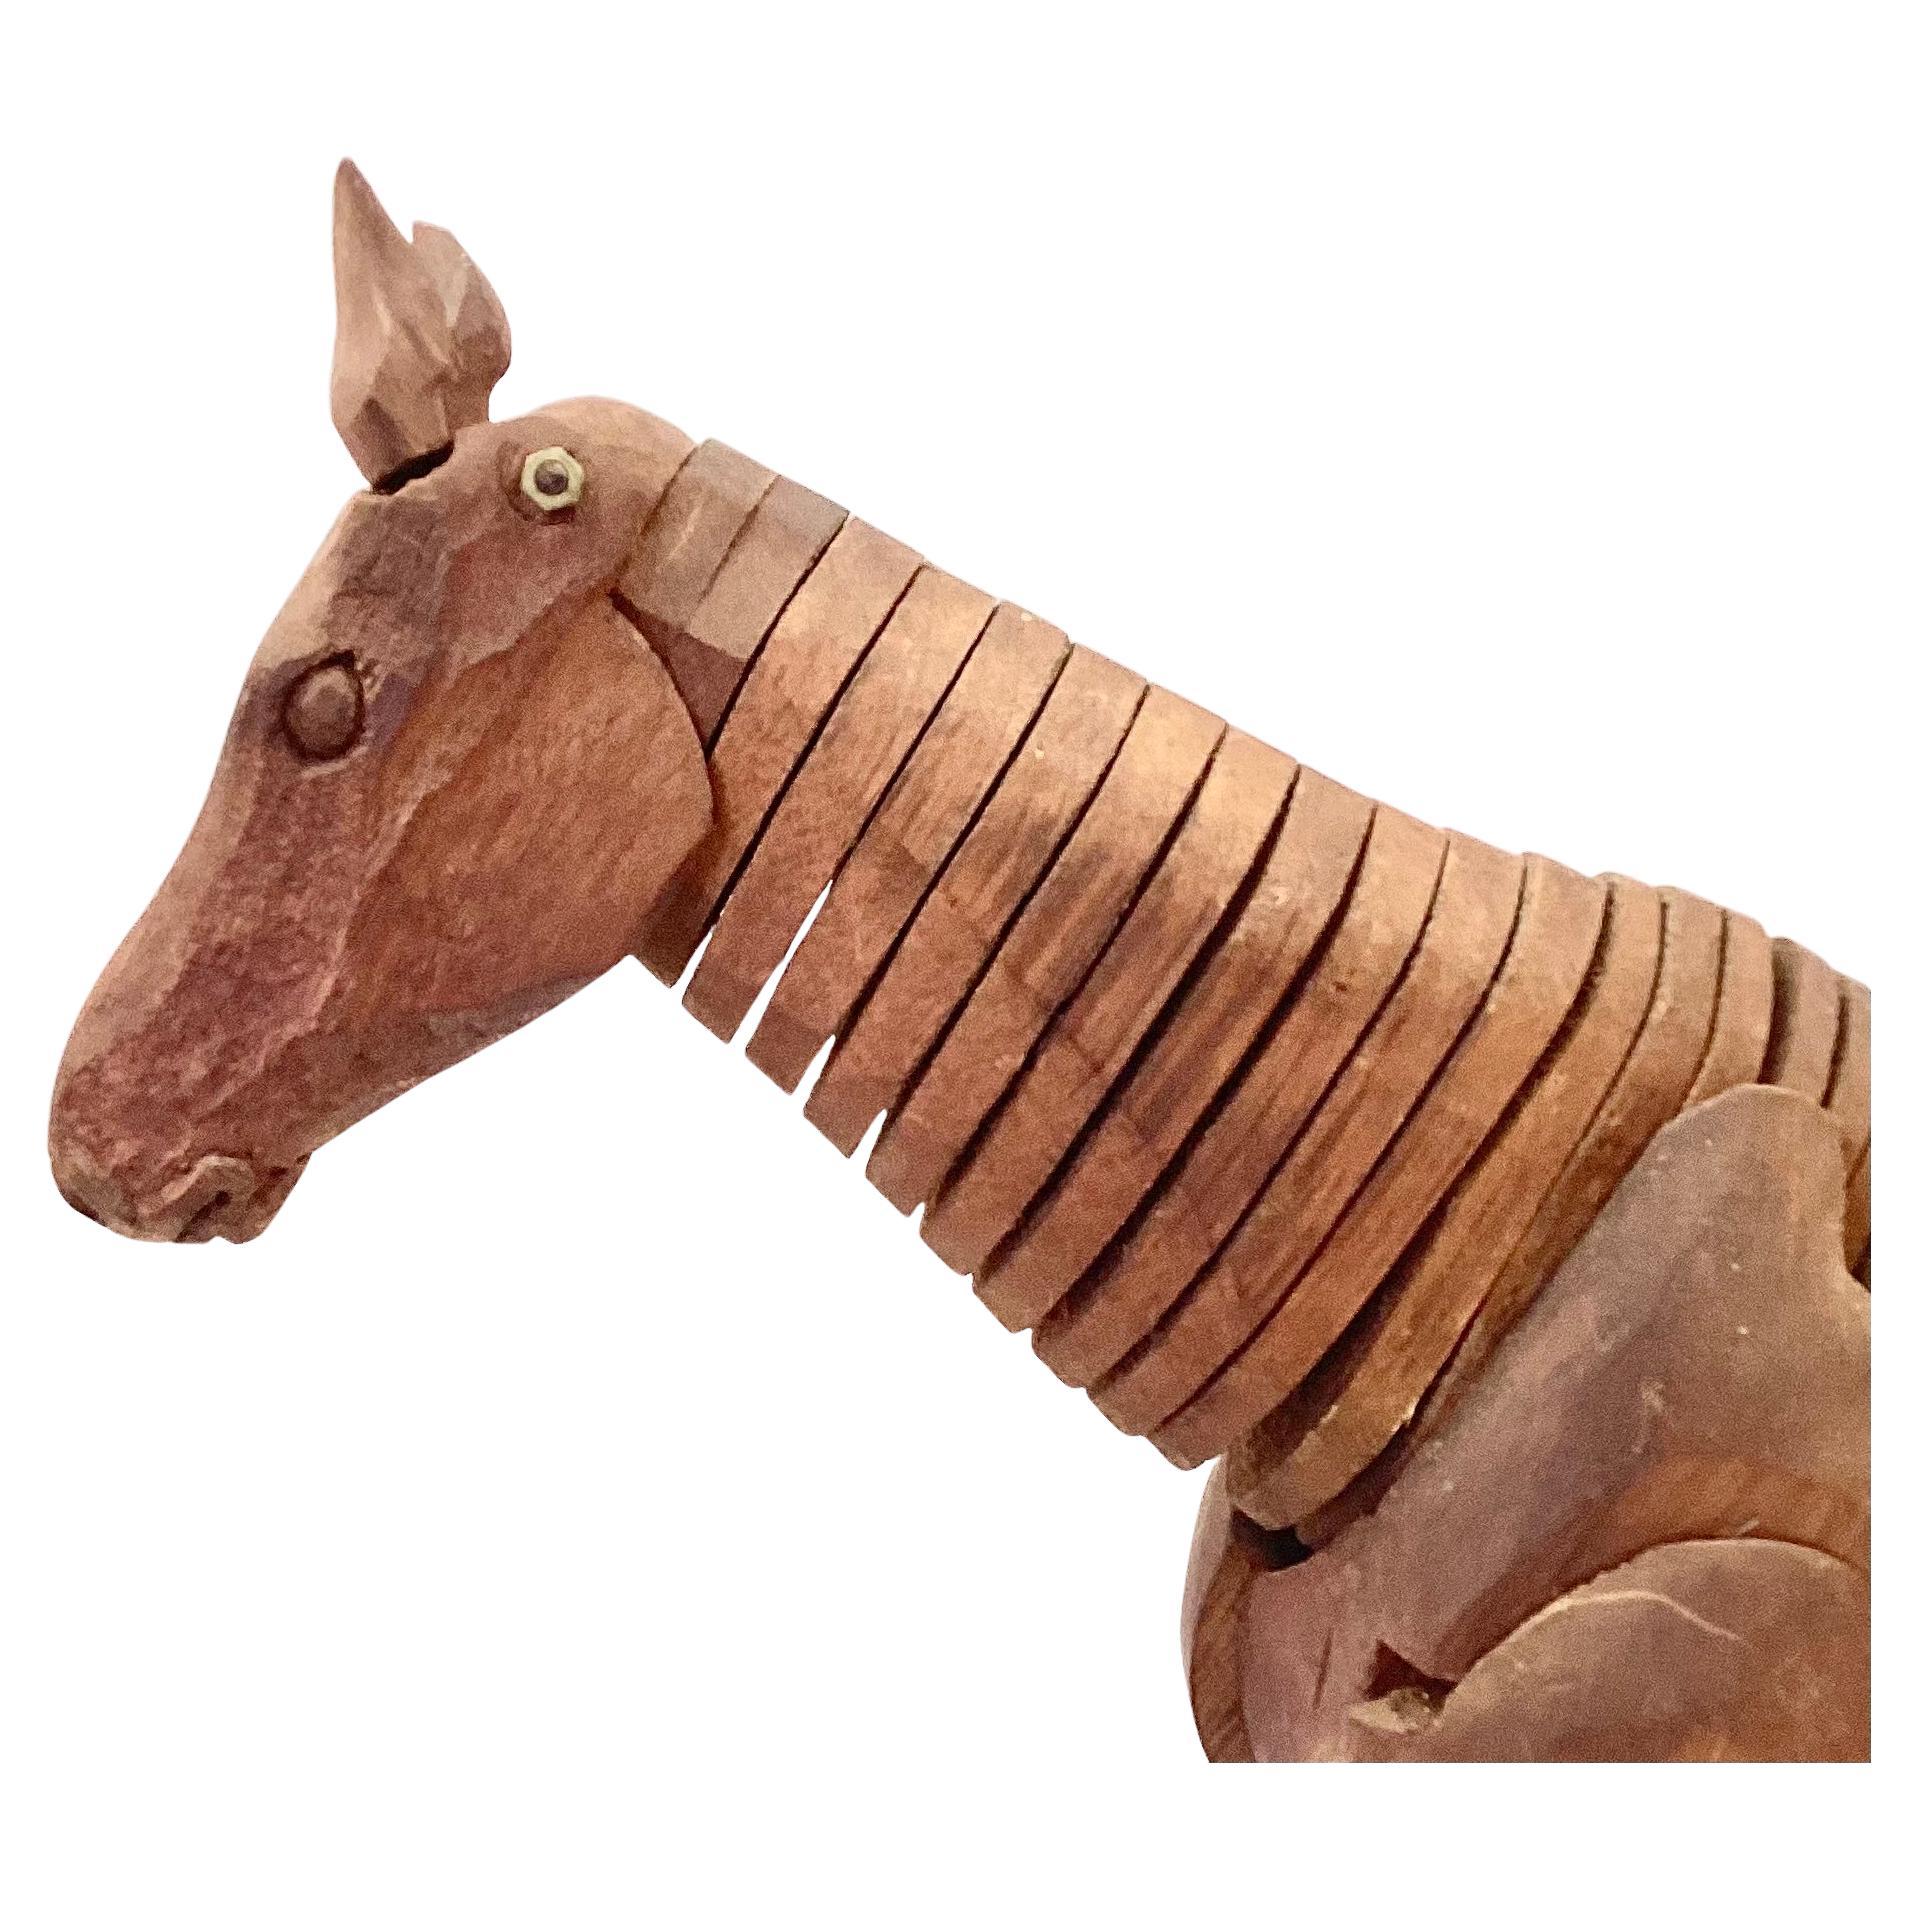 Antique hand-carved artist's model of a horse, fully articulated at every level including wooden ears. Has a horsehair tail. Fixed on a brass stem and raised on a wooden base. Artist signed on base as Philippe Leo. 